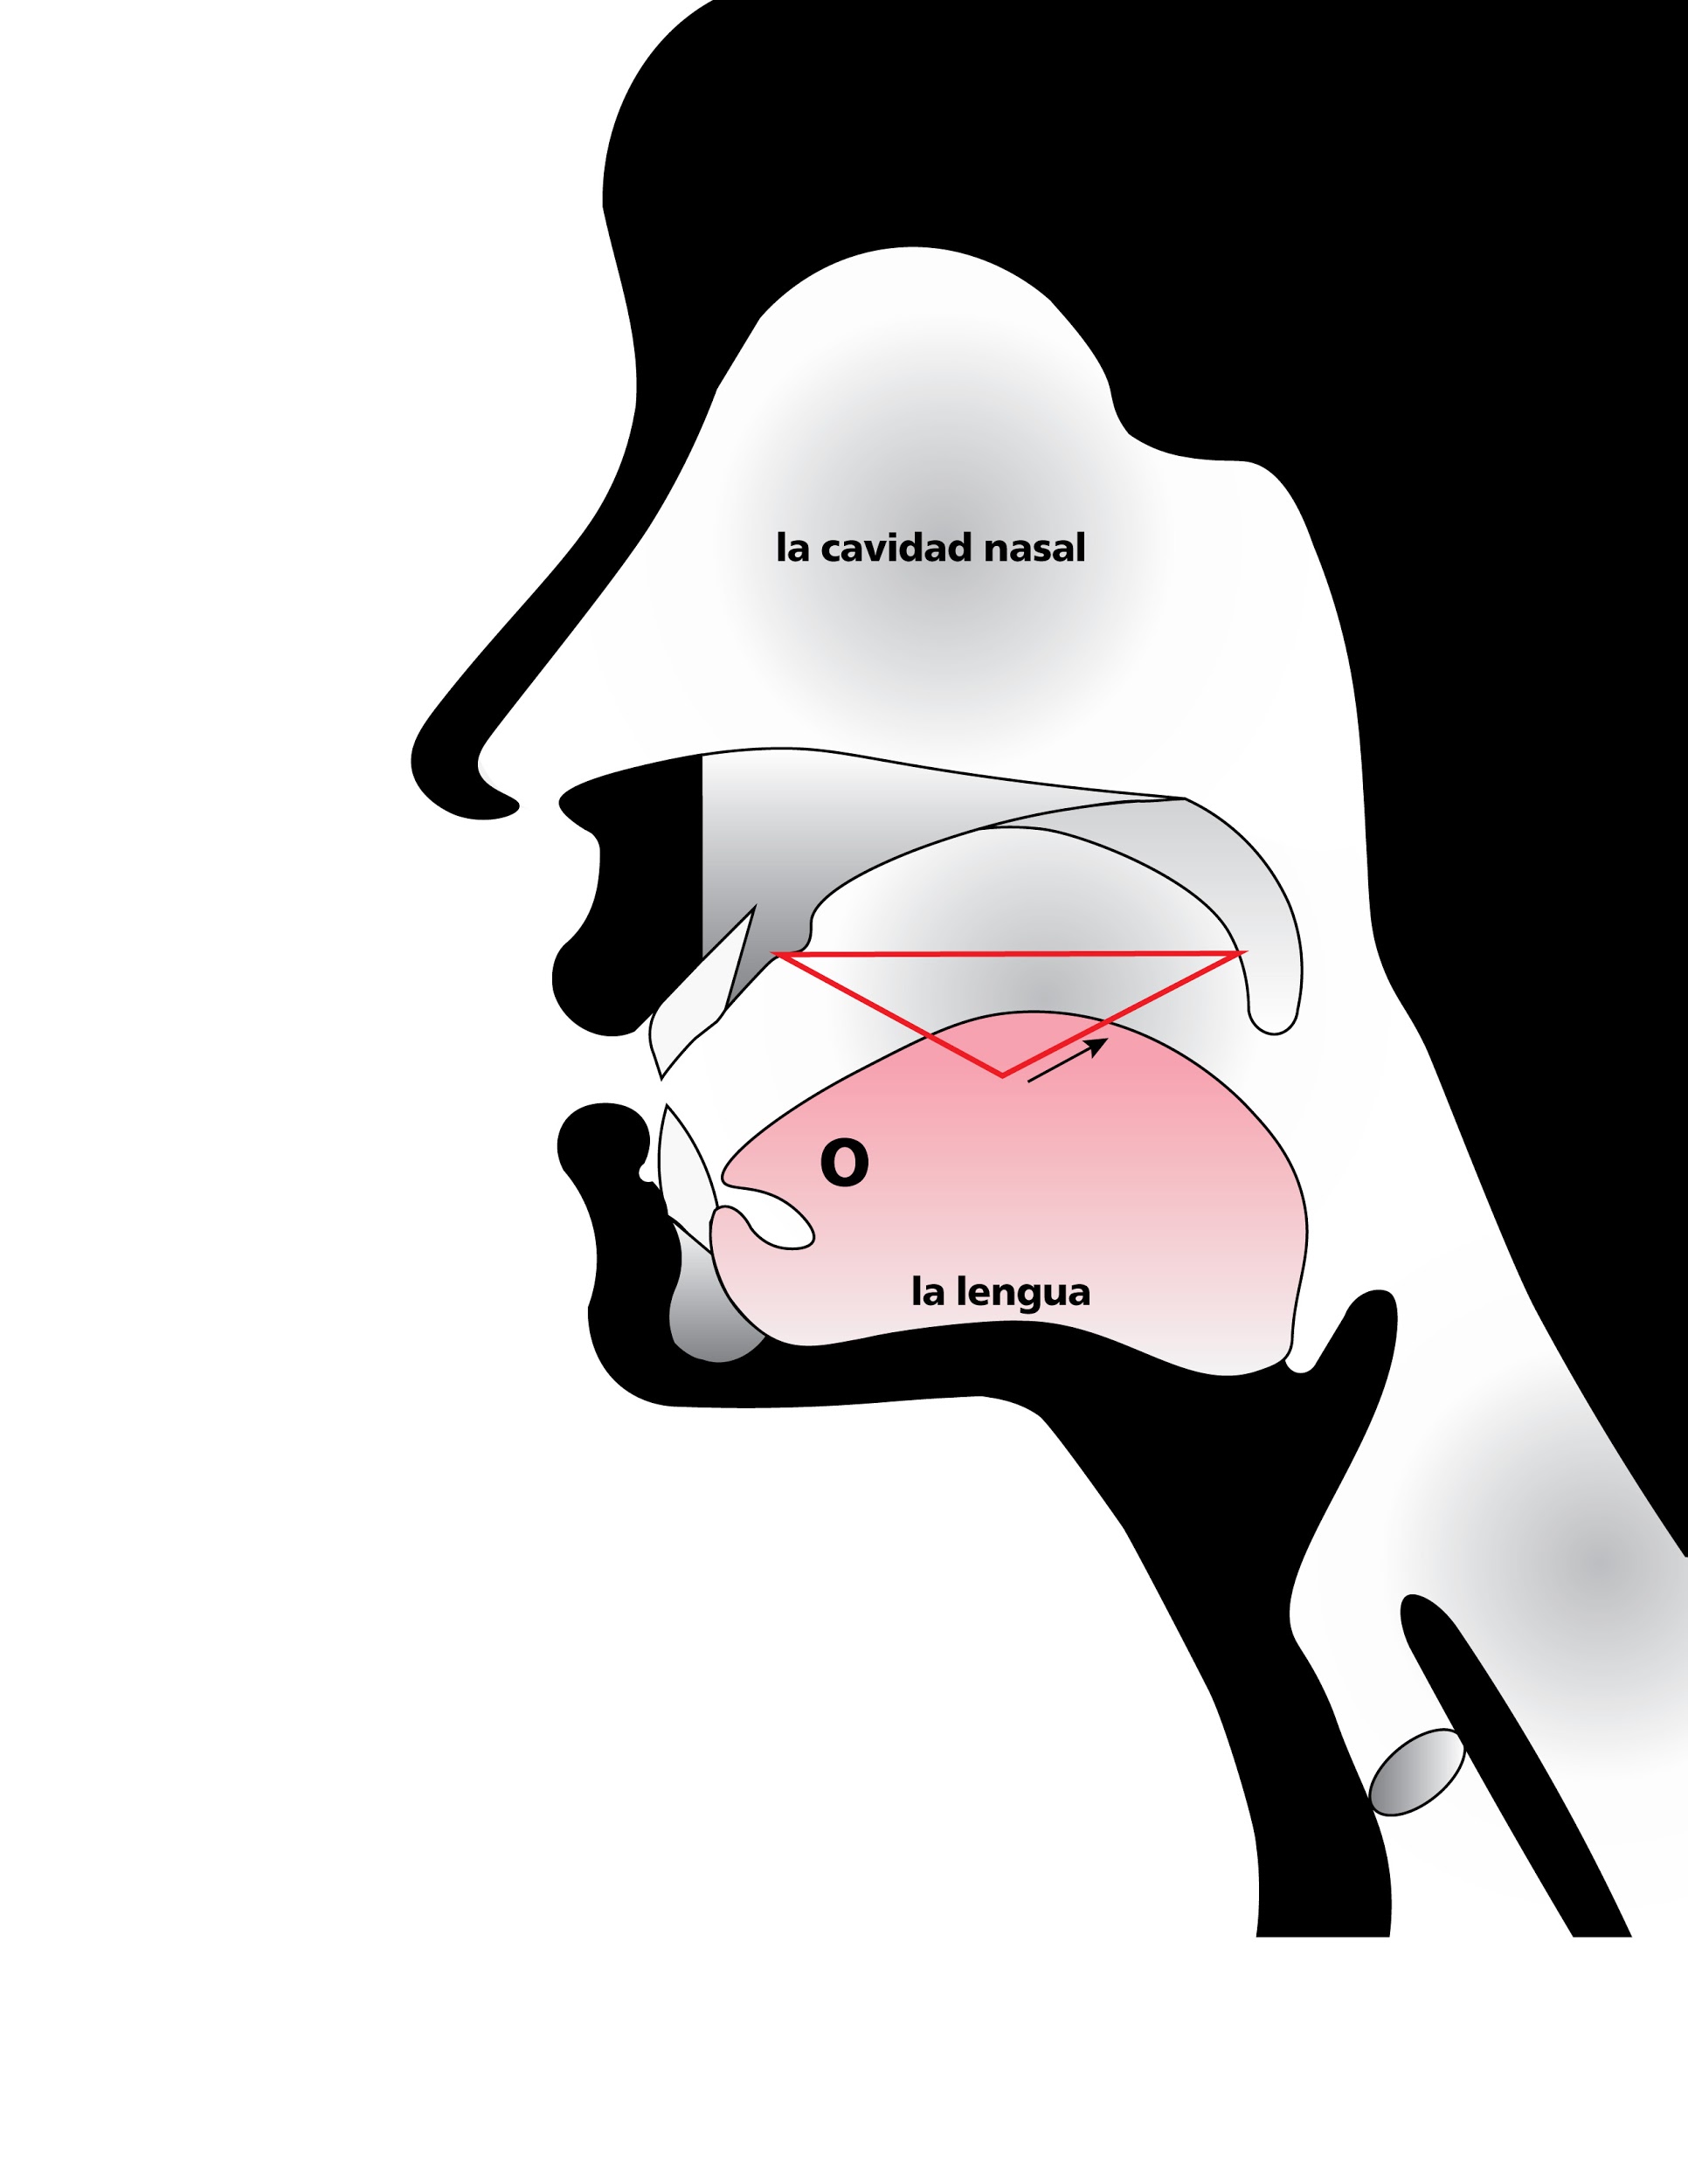 Anatomical sketch of head while speaking, emphasizing space of roof of mouth when tongue partly lowered, in Spanish